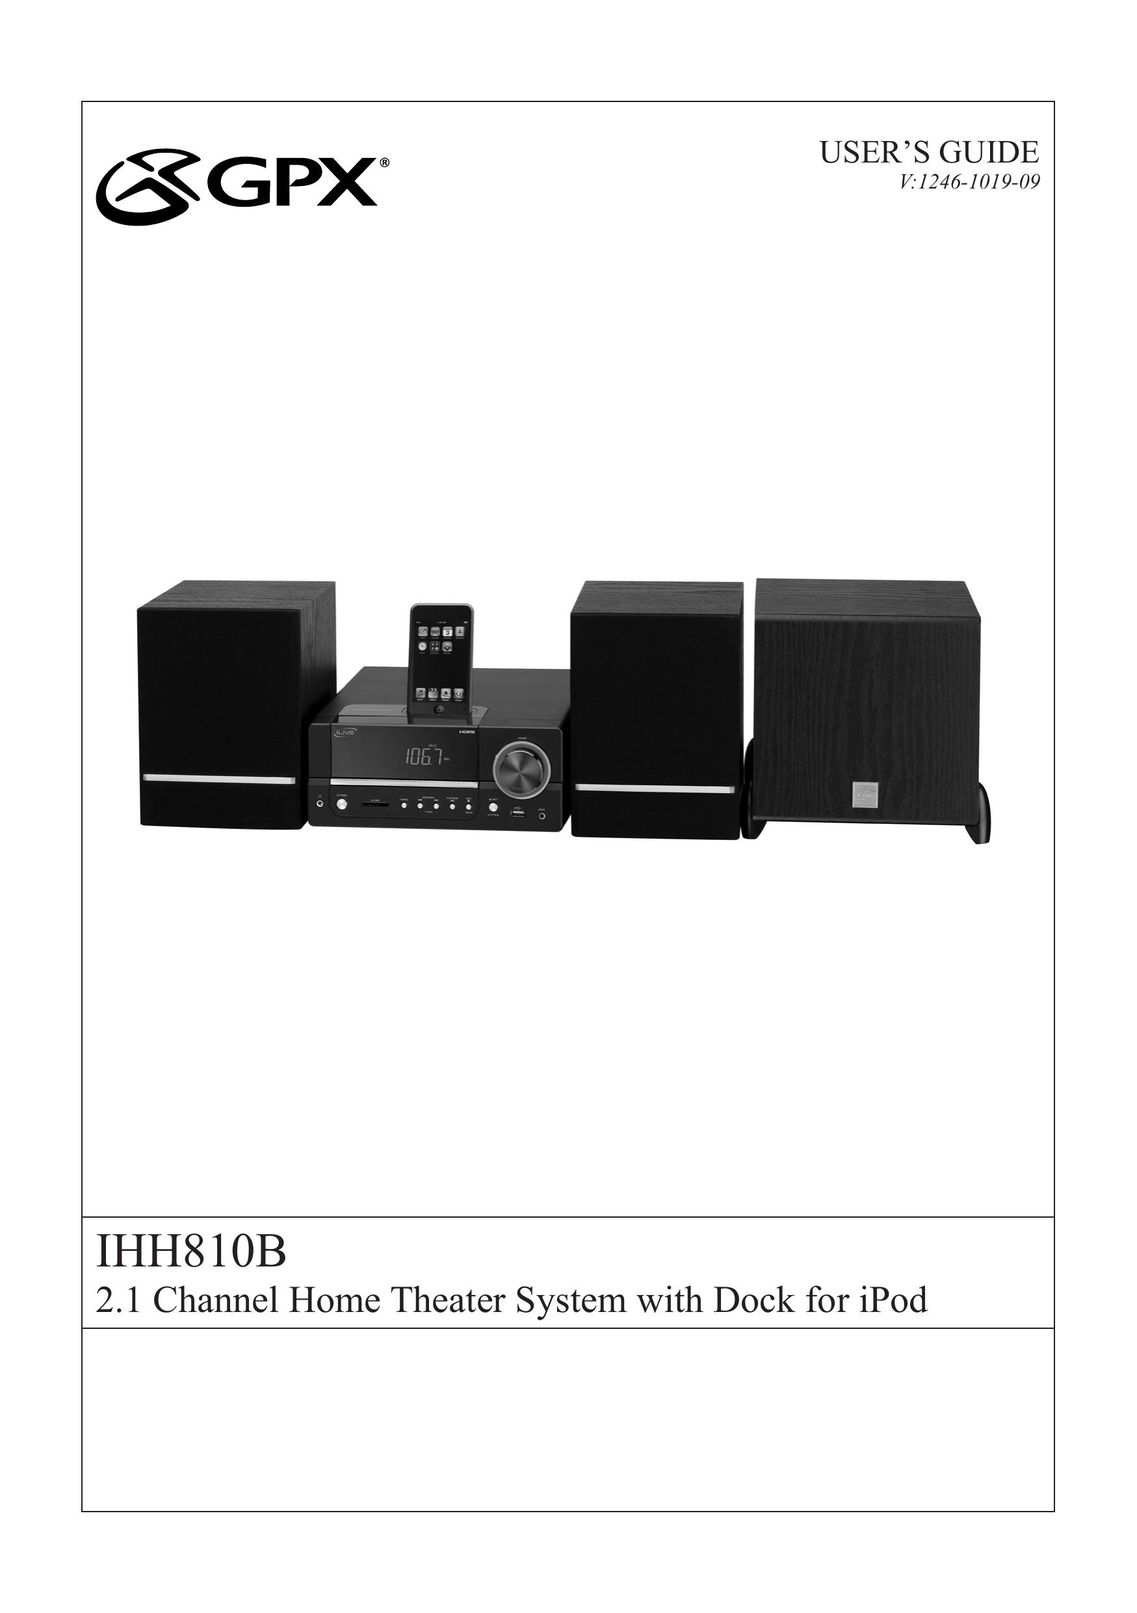 GPX IHH810B Home Theater System User Manual